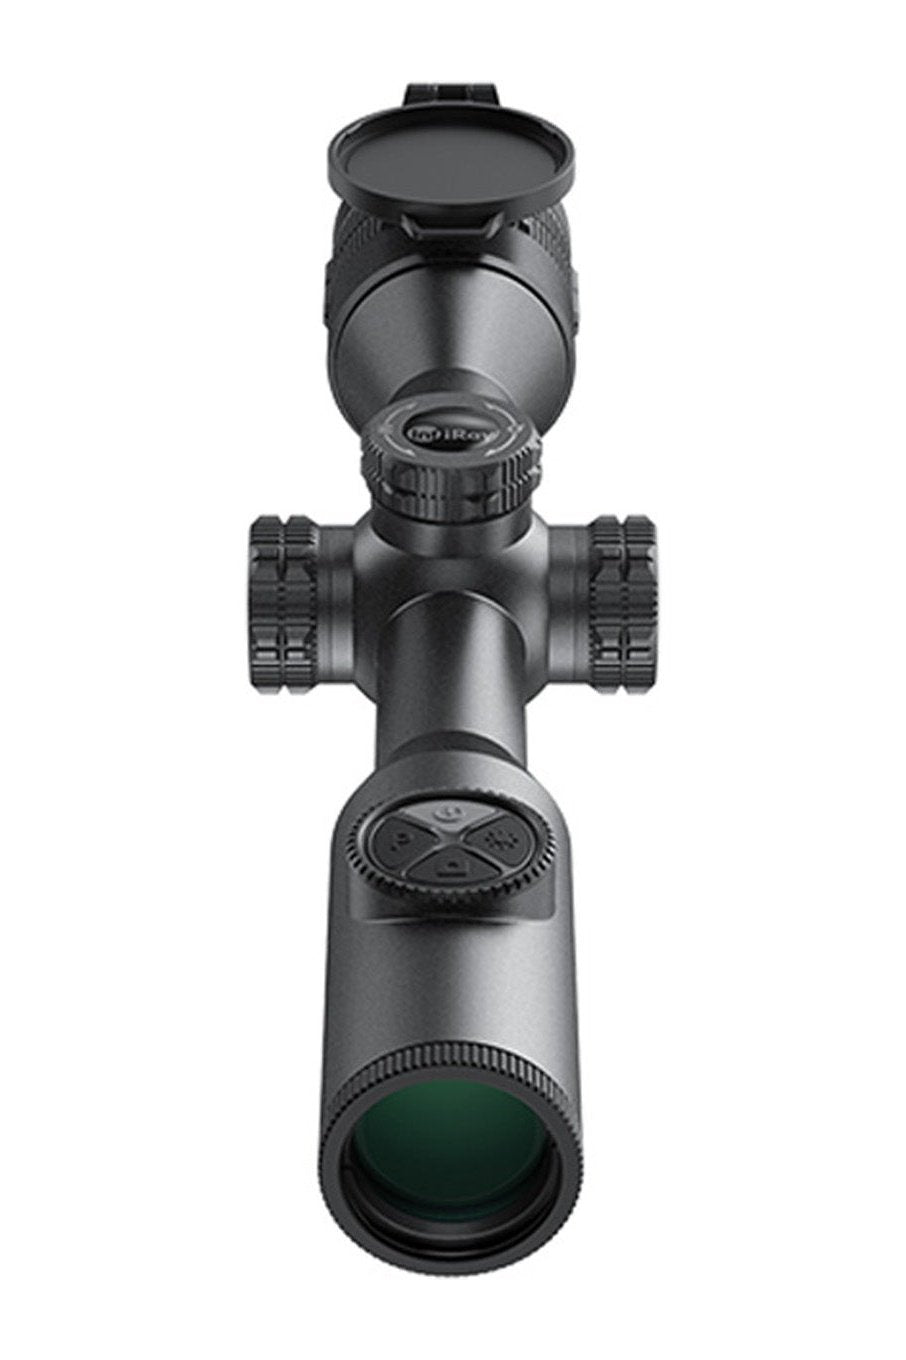 InfiRay TL50 Thermal Scope